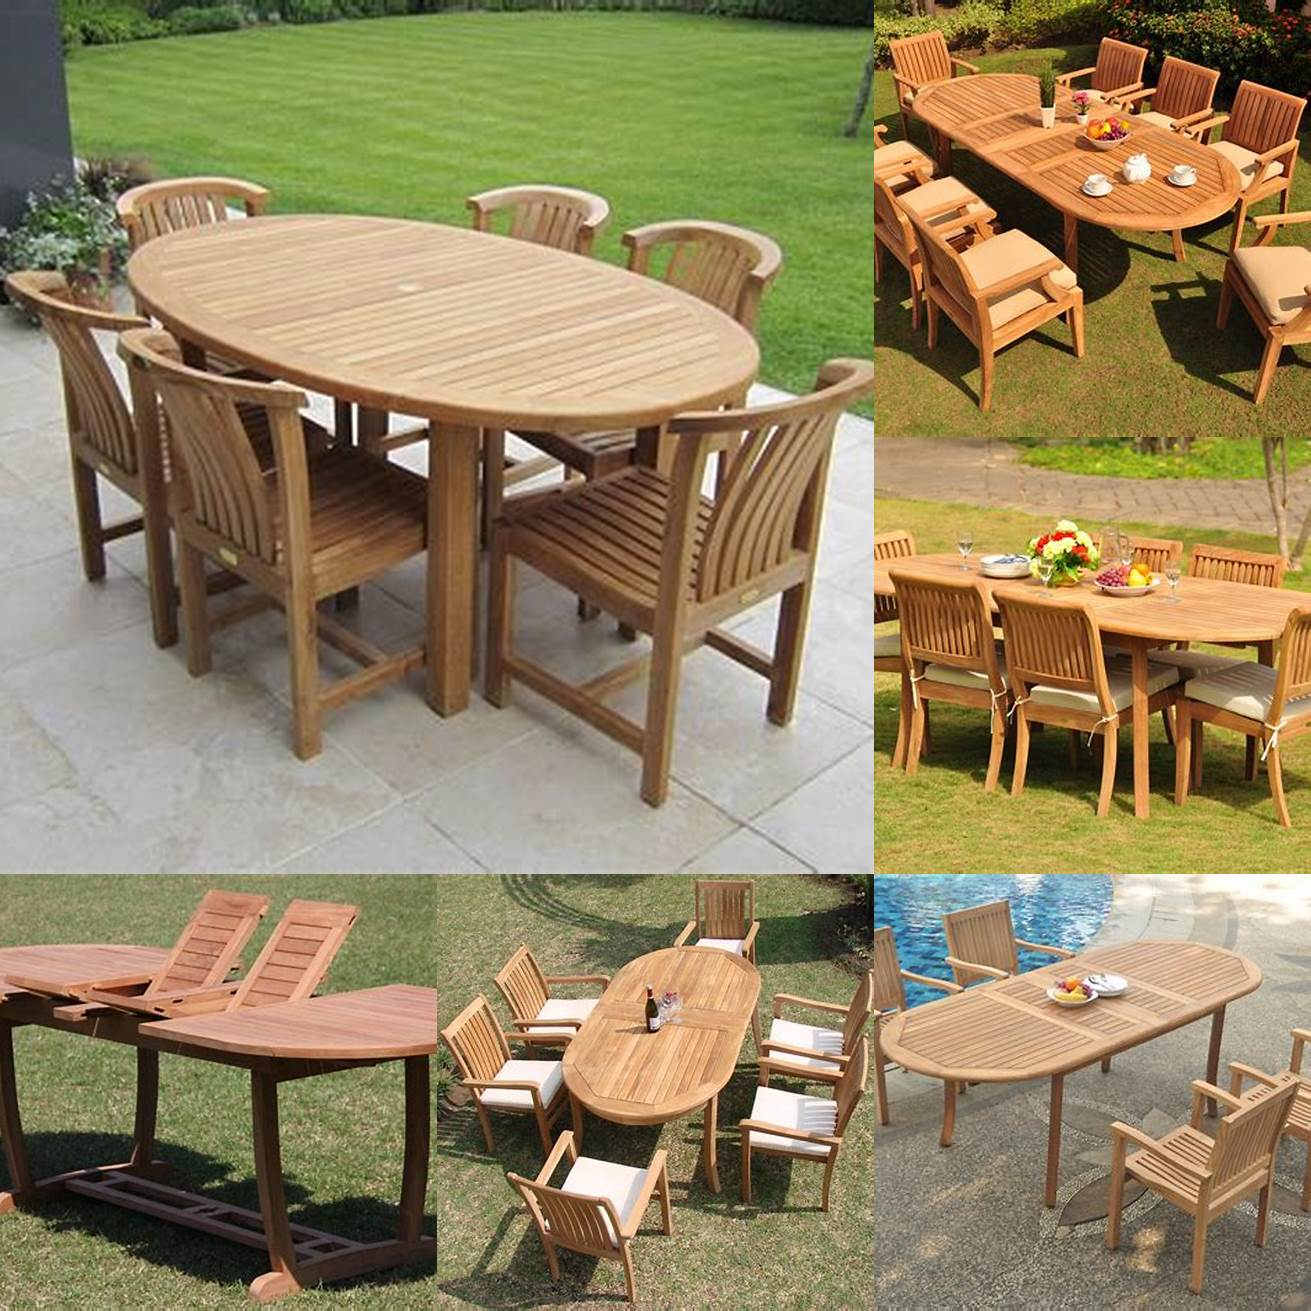 Oval Teak Outdoor Dining Table